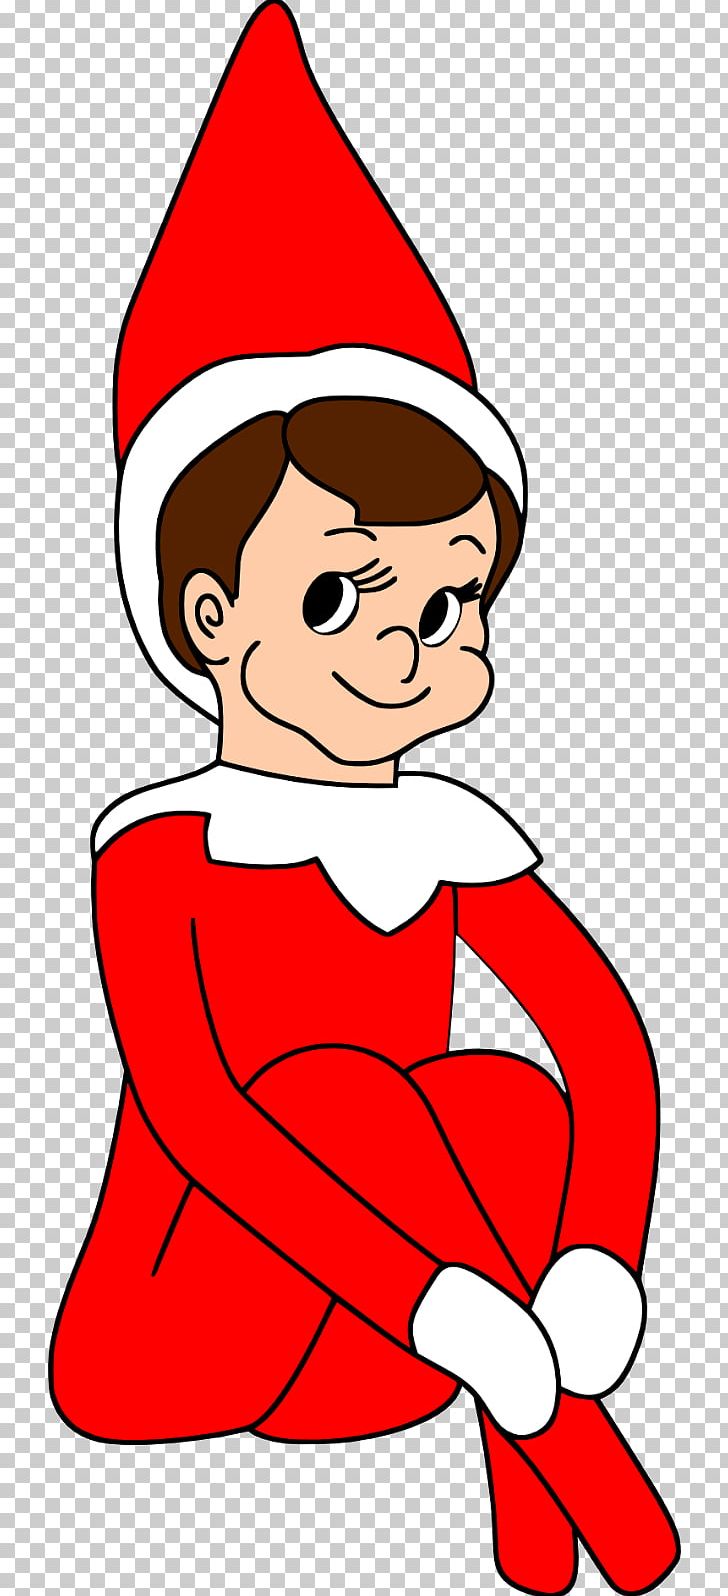 The Elf On The Shelf Christmas Elf PNG, Clipart, Area, Artwork, Book, Cartoon, Christmas Free PNG Download